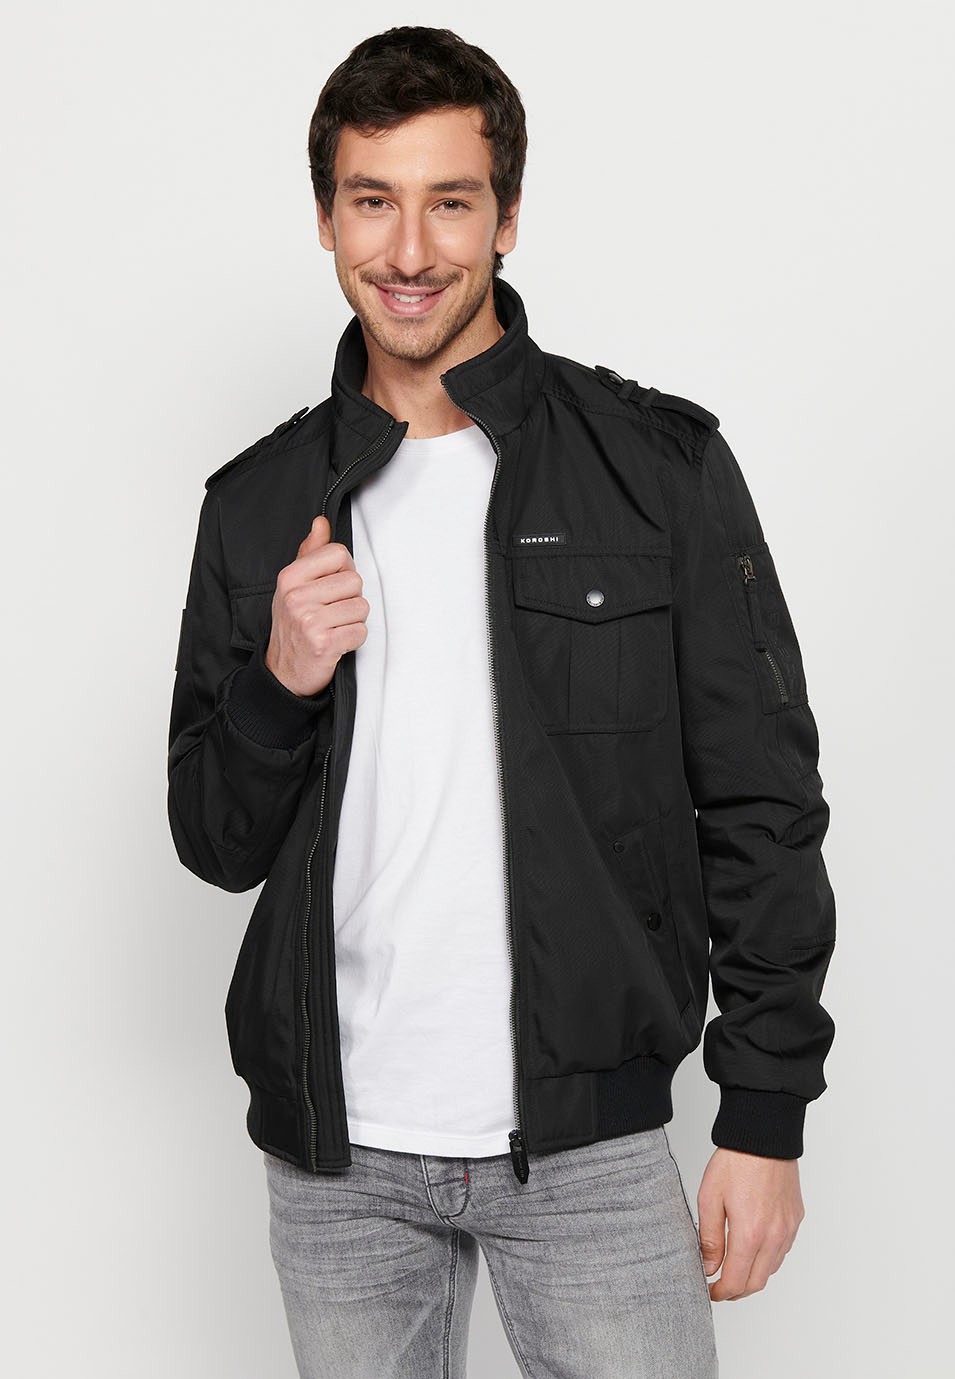 Black Long Sleeve Jacket with Round Neck and Front Zipper Closure with Flap Pockets for Men 8